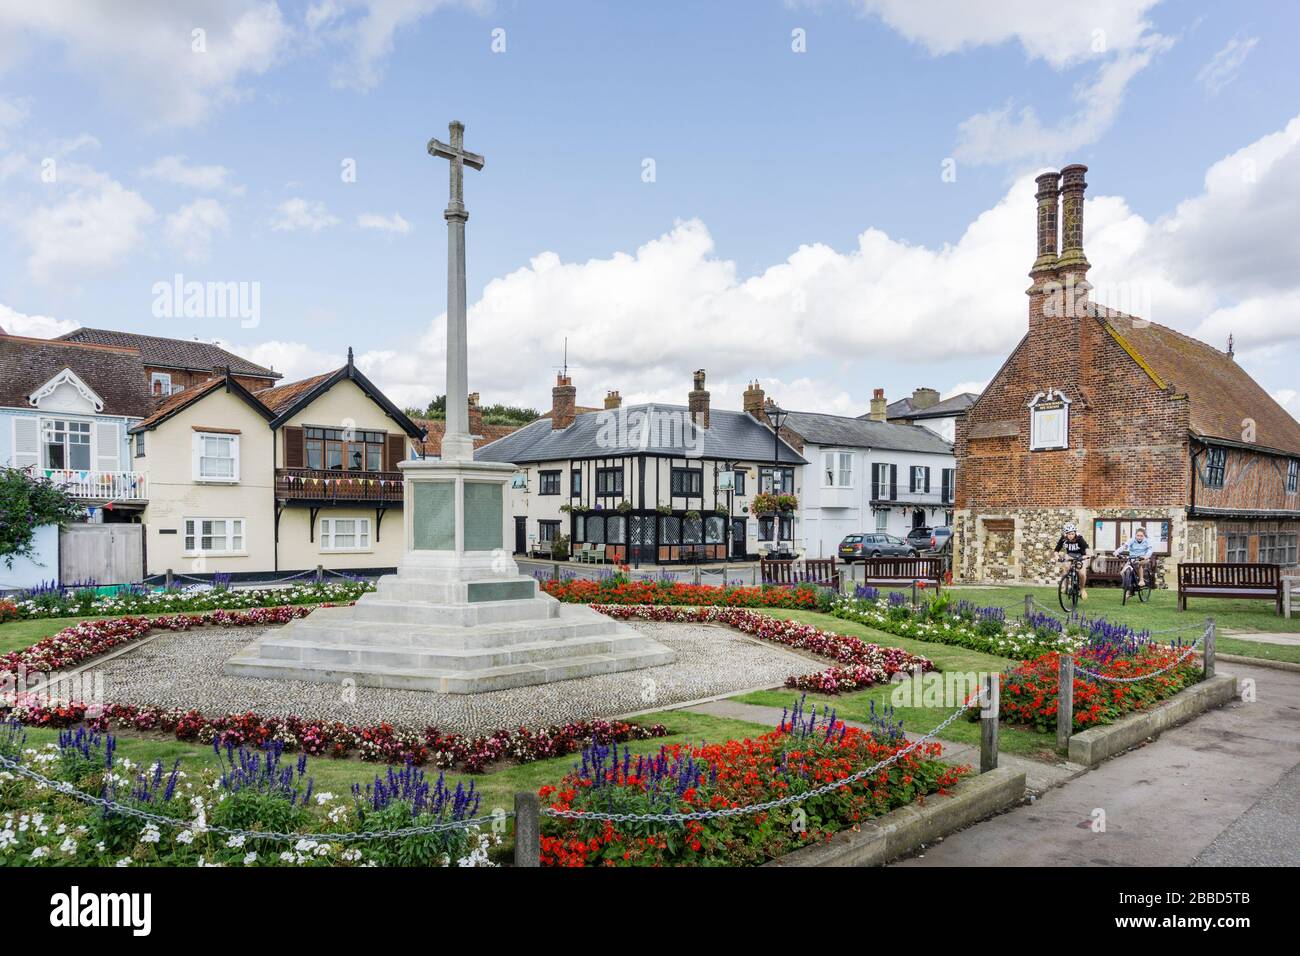 16th century Moot Hall, with the War Memorial in the foreground, in the seaside resort of Aldeburgh, Suffolk, UK Stock Photo